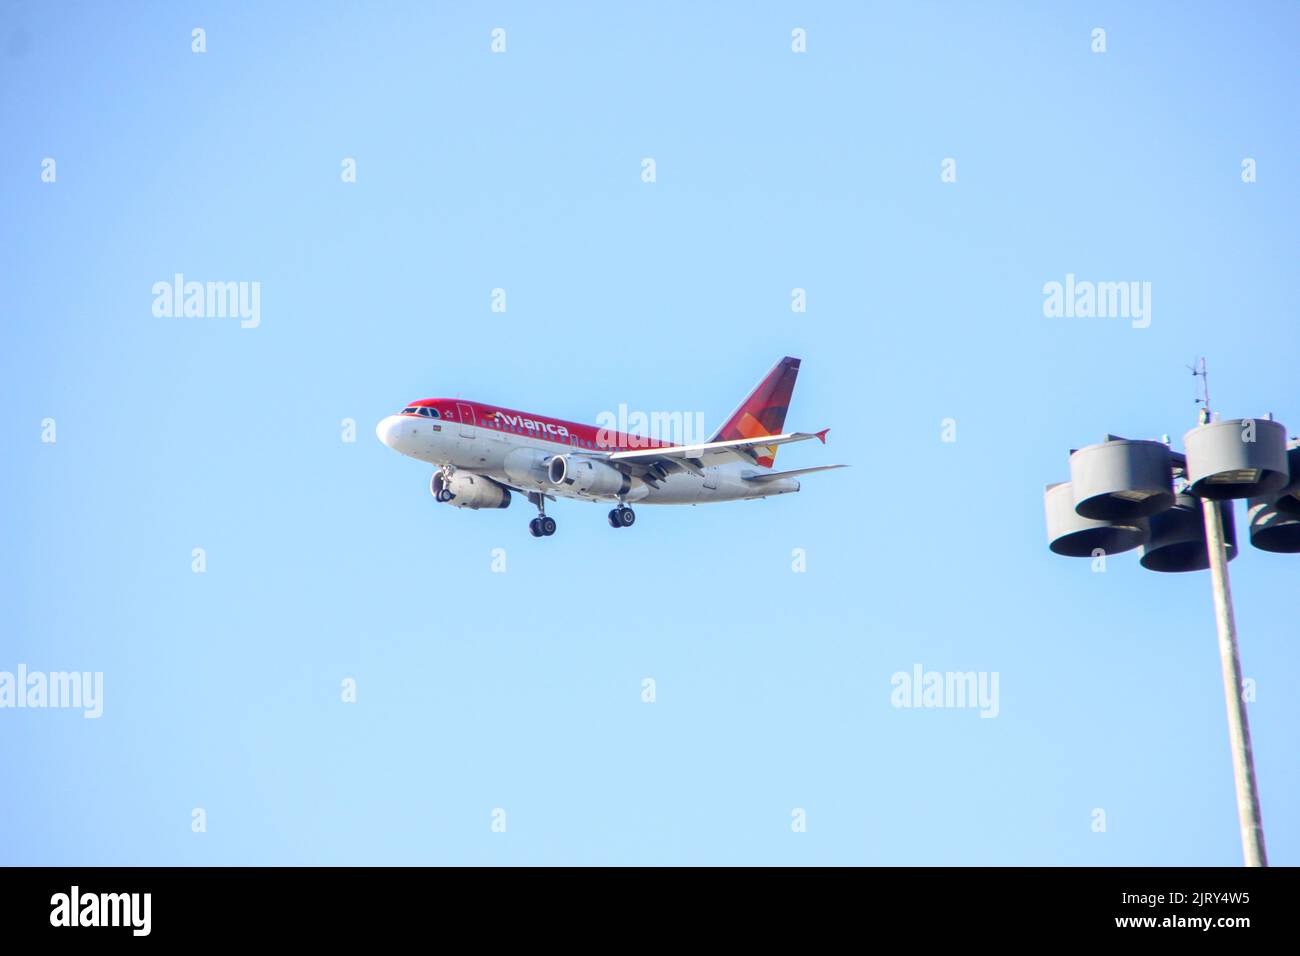 Airplane approaching the Santos Dumont airport in Rio de Janeiro - January 27, 2019: Plane approaching to land at Santos Dumont airport in Rio de Jane Stock Photo